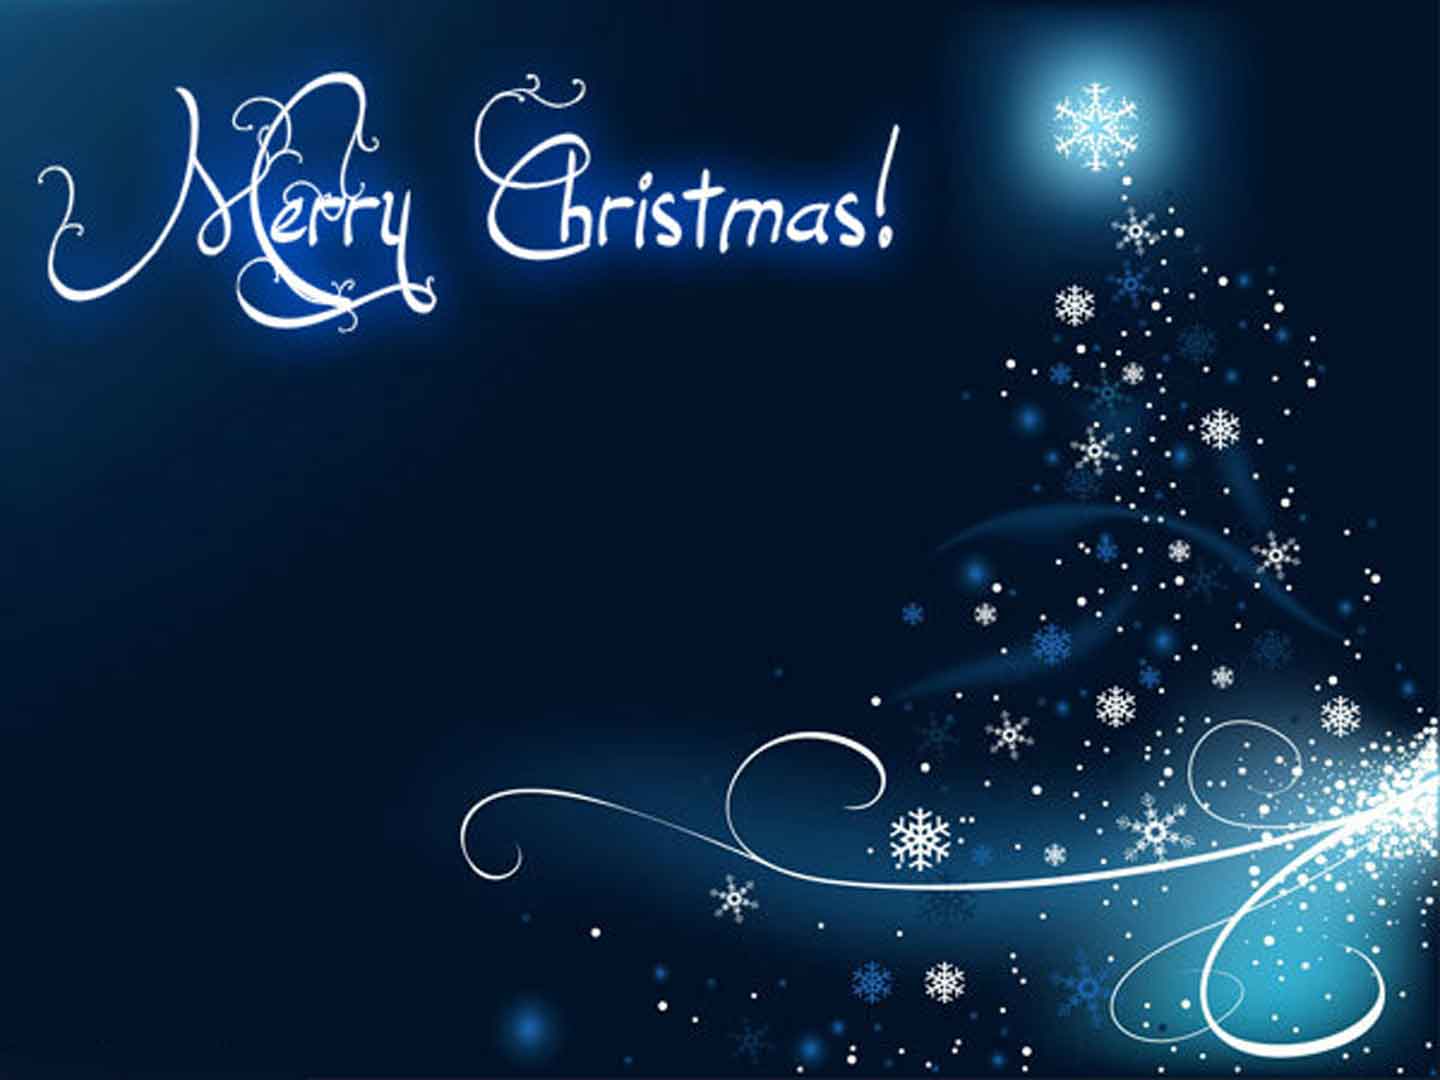 Merry Christmas Picture Free Download 12864 HD Desktop